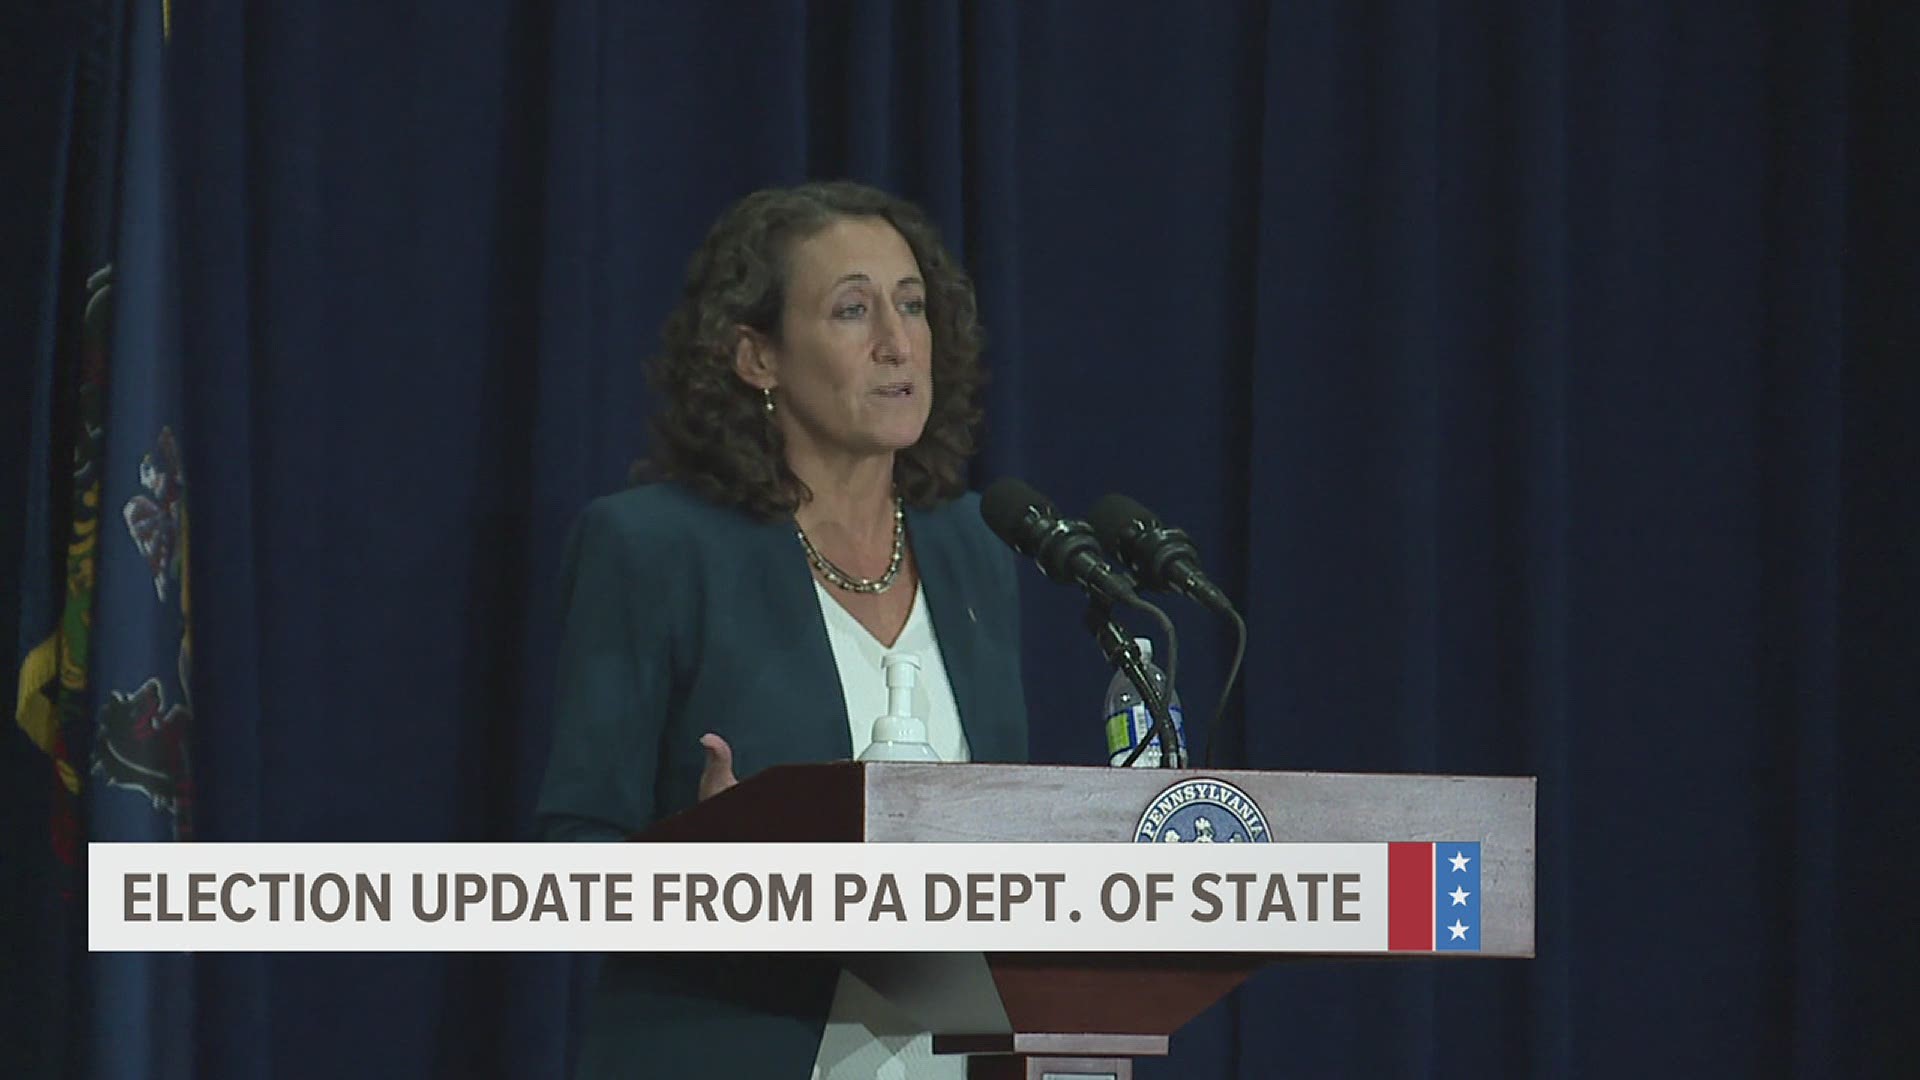 They claim she "fundamentally altered" the manner in which PA conducts its elections.